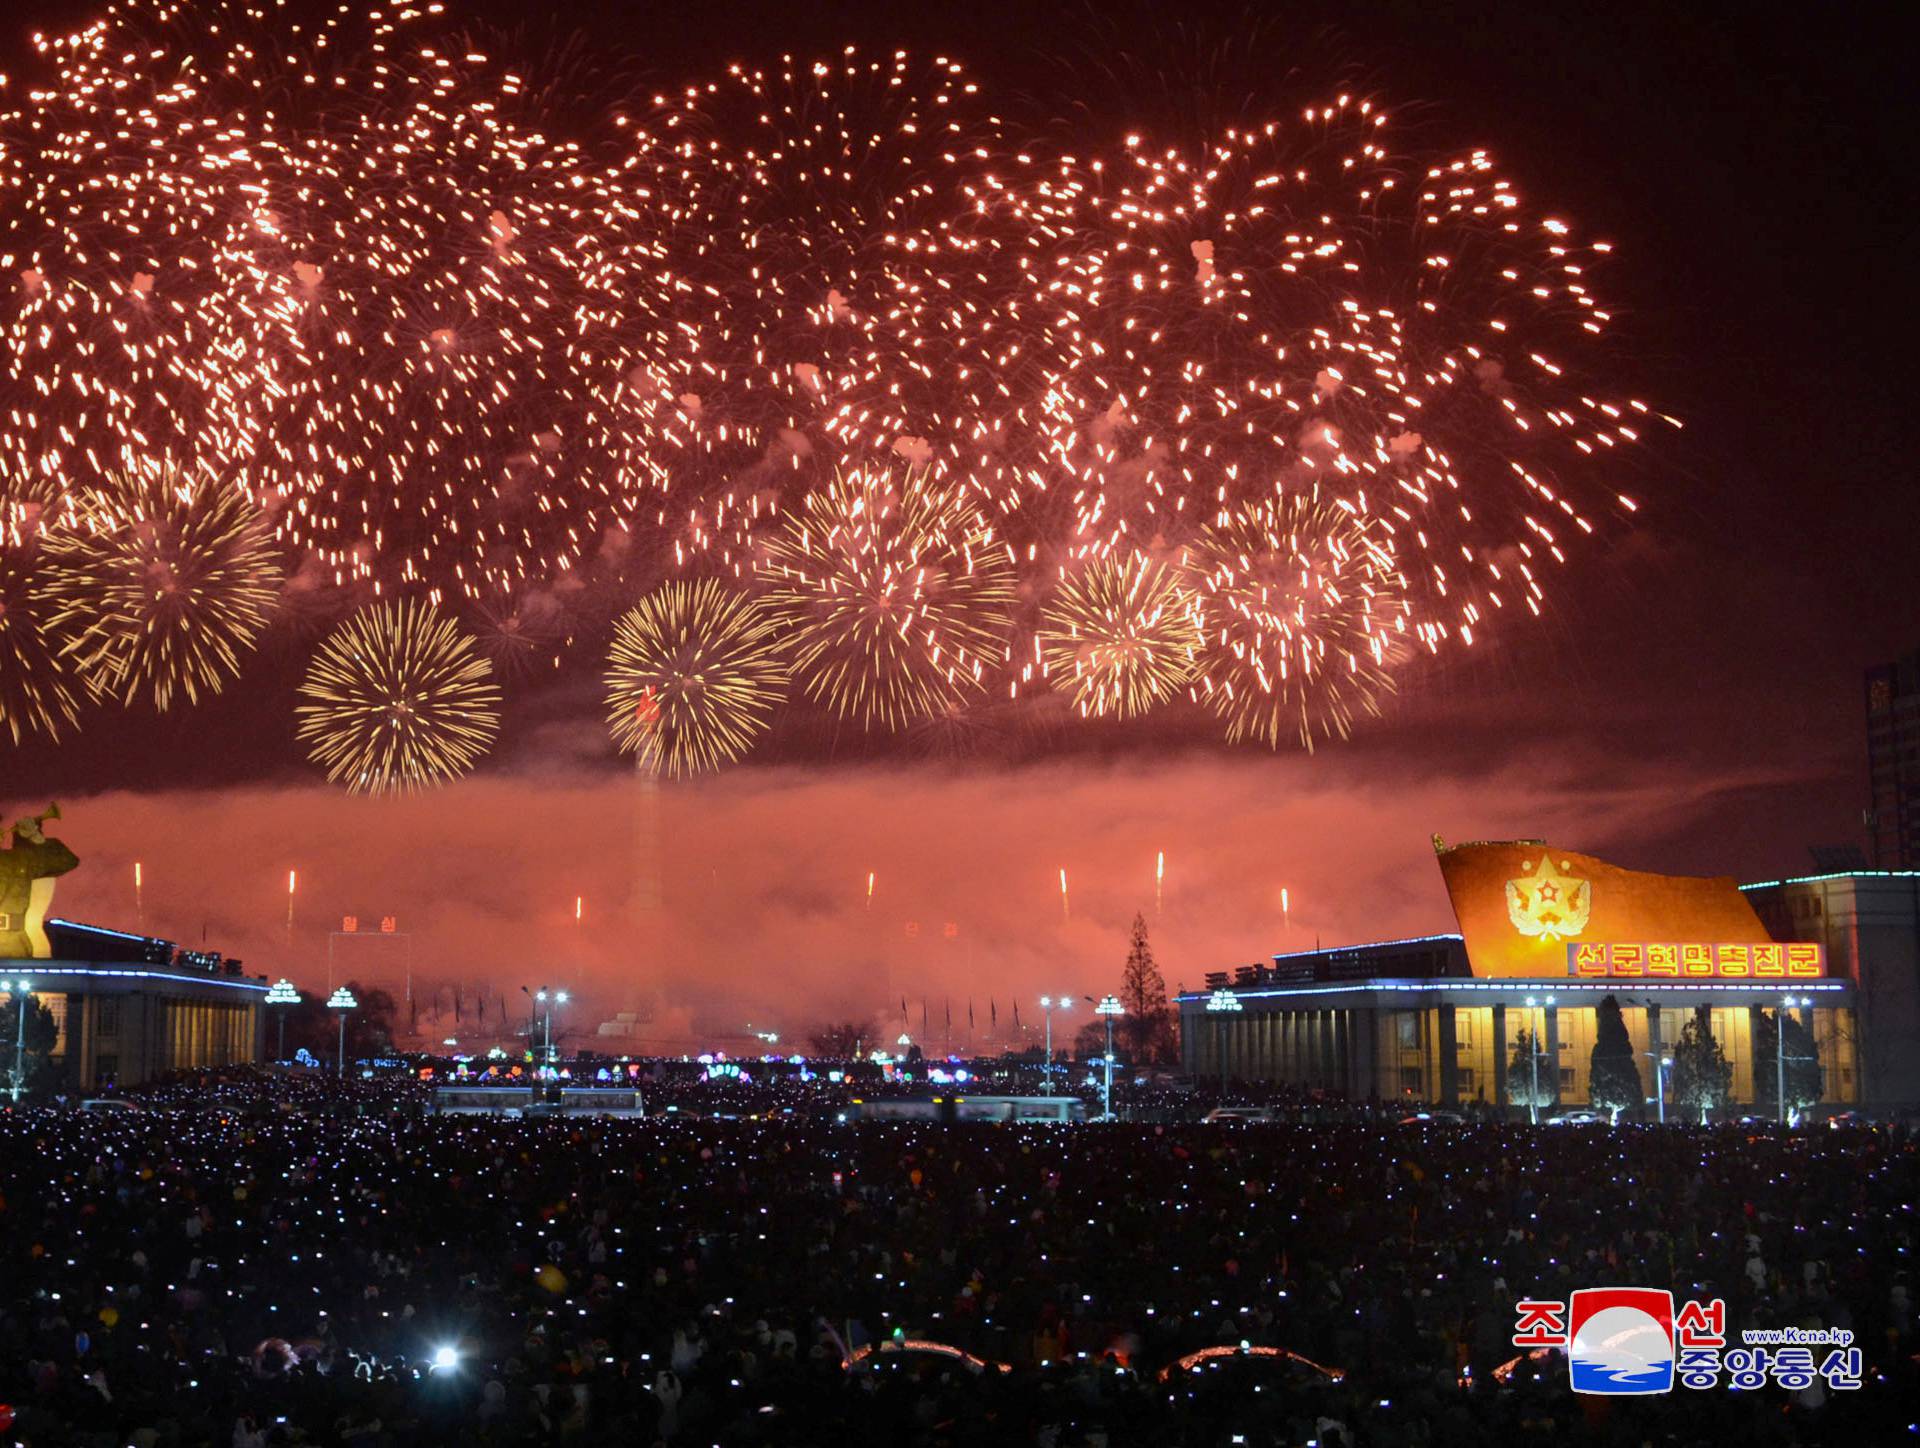 KCNA picture of fireworks during New Year celebrations